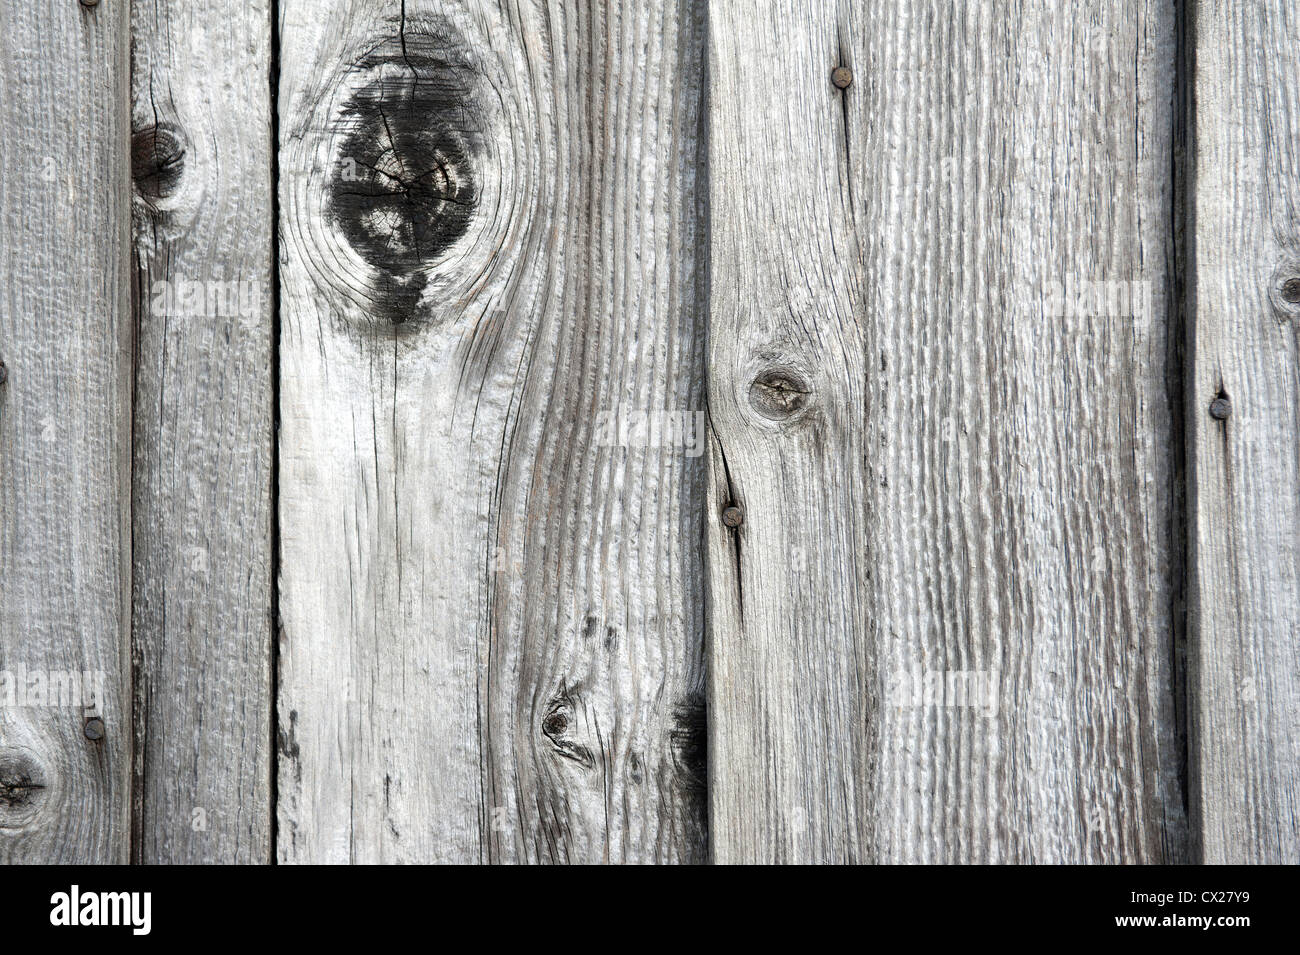 Old weatherbeaten wood with nails and knots Stock Photo